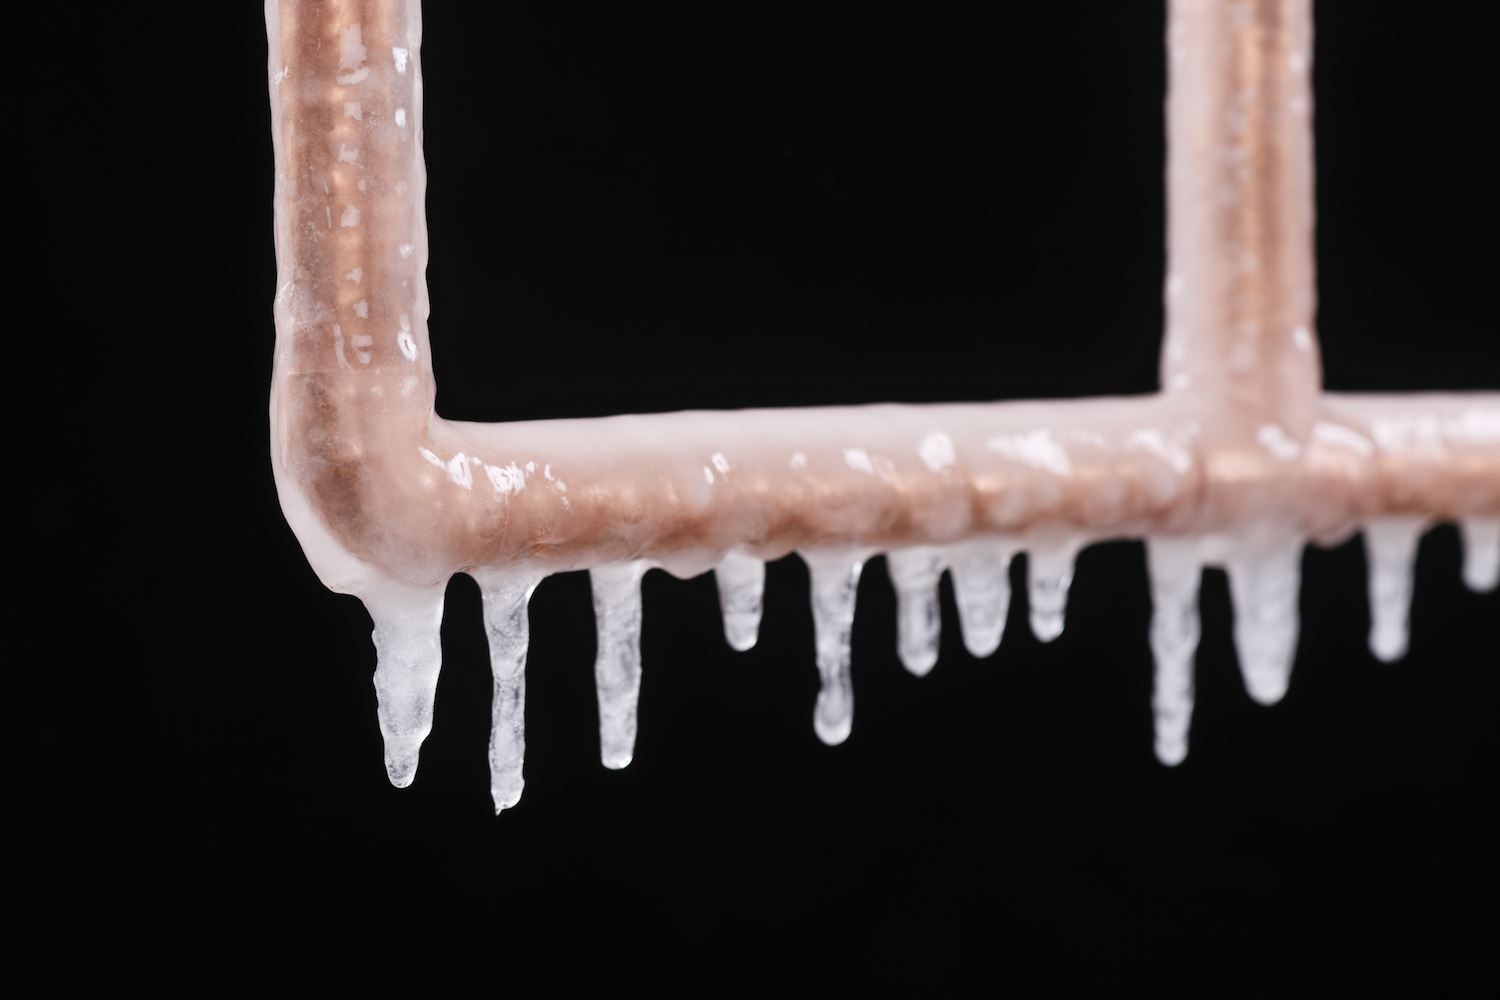 A few simple measures can save expensive repair bills due to frozen pipes.